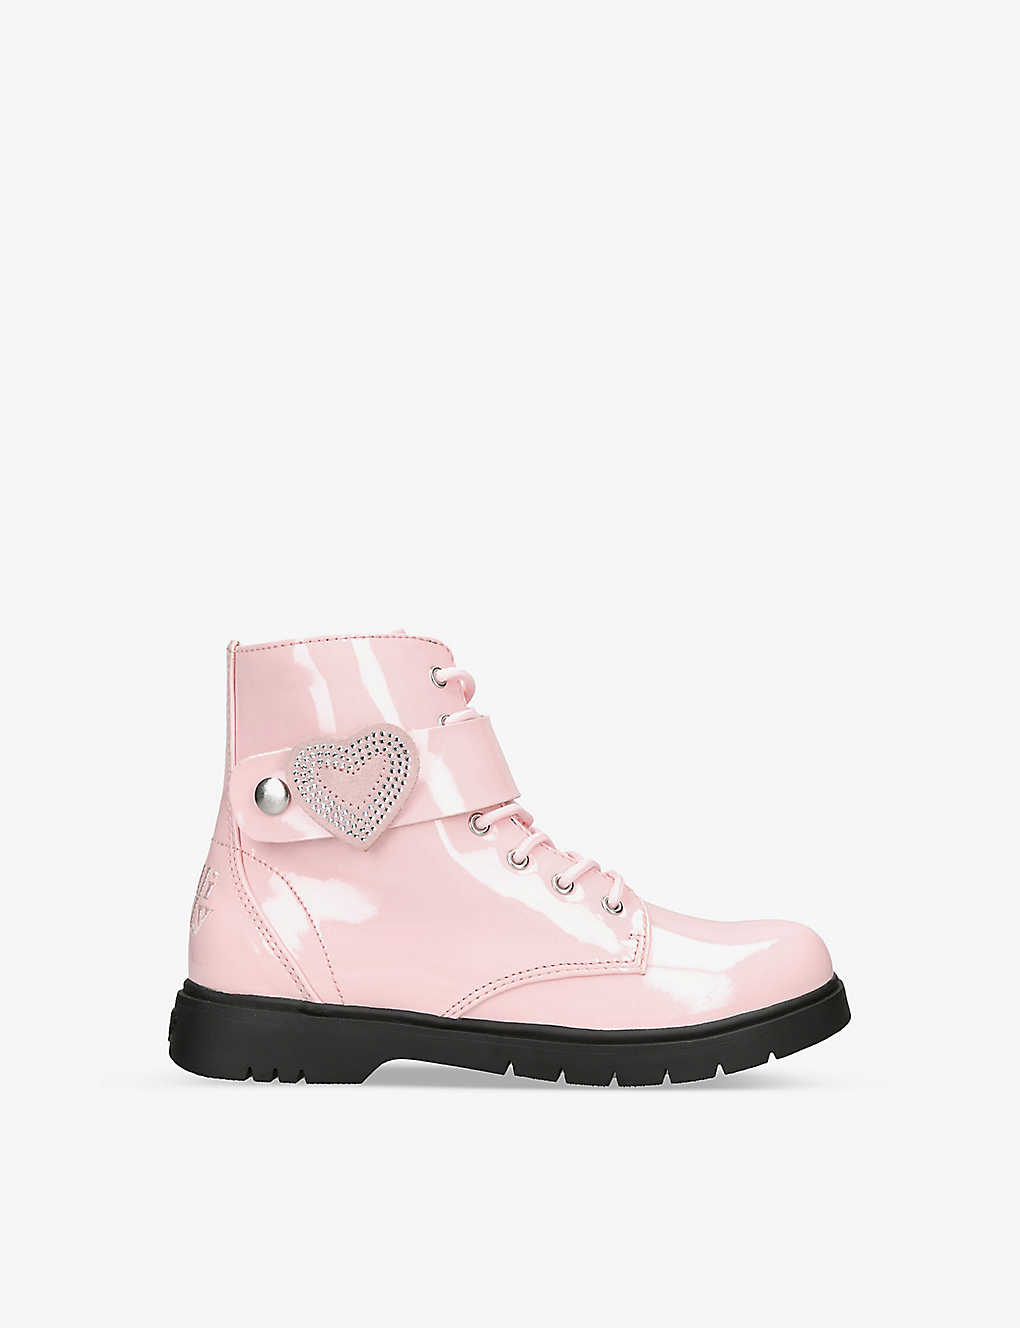 Lelli Kelly Kids' Girls Pink Faux Patent Leather Boots